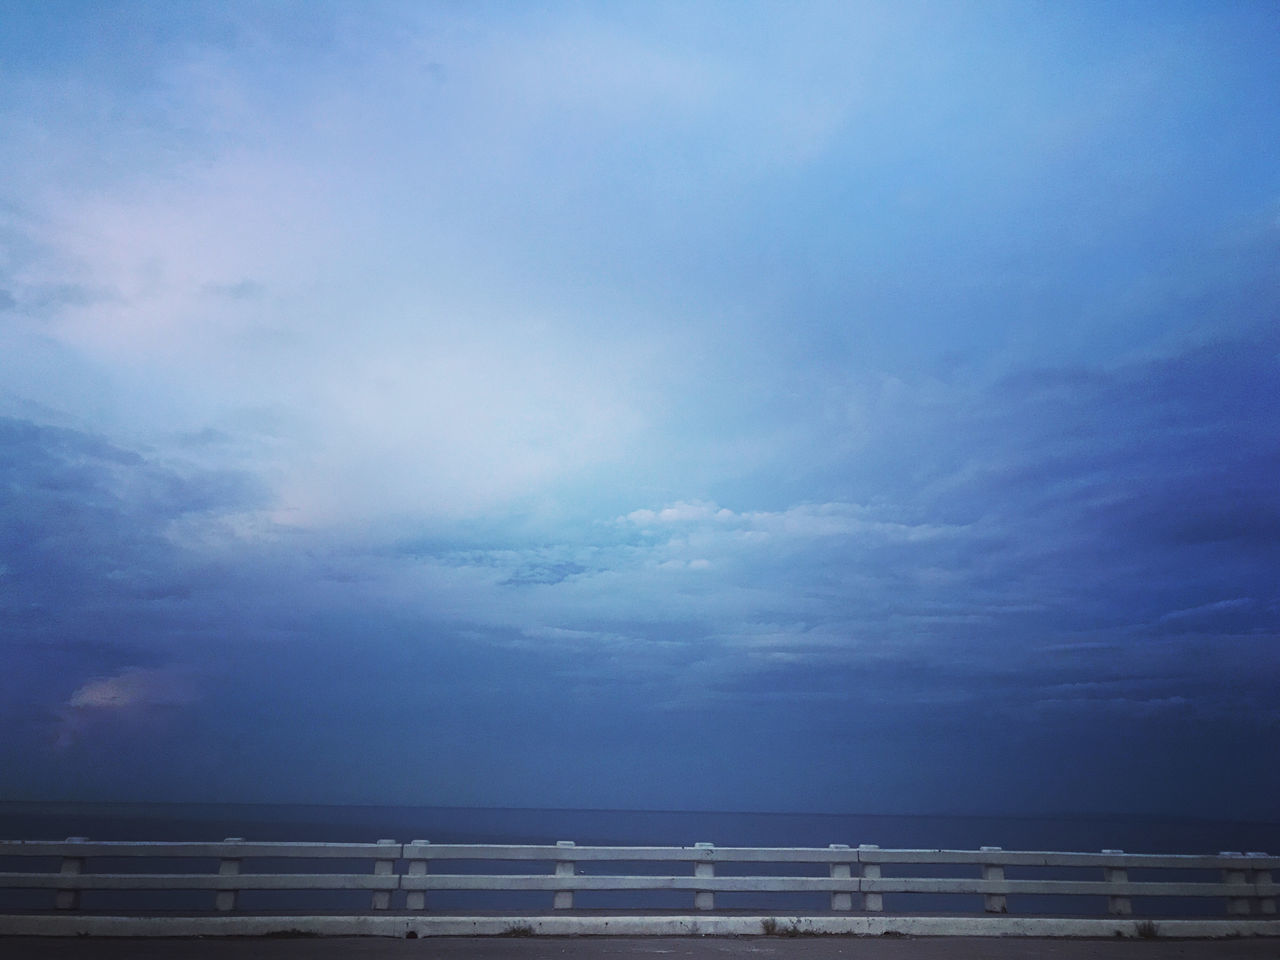 sky, horizon, sea, cloud, ocean, water, beauty in nature, nature, dusk, scenics - nature, horizon over water, tranquility, blue, no people, tranquil scene, sunlight, environment, coast, outdoors, evening, beach, idyllic, day, railing, wave, land